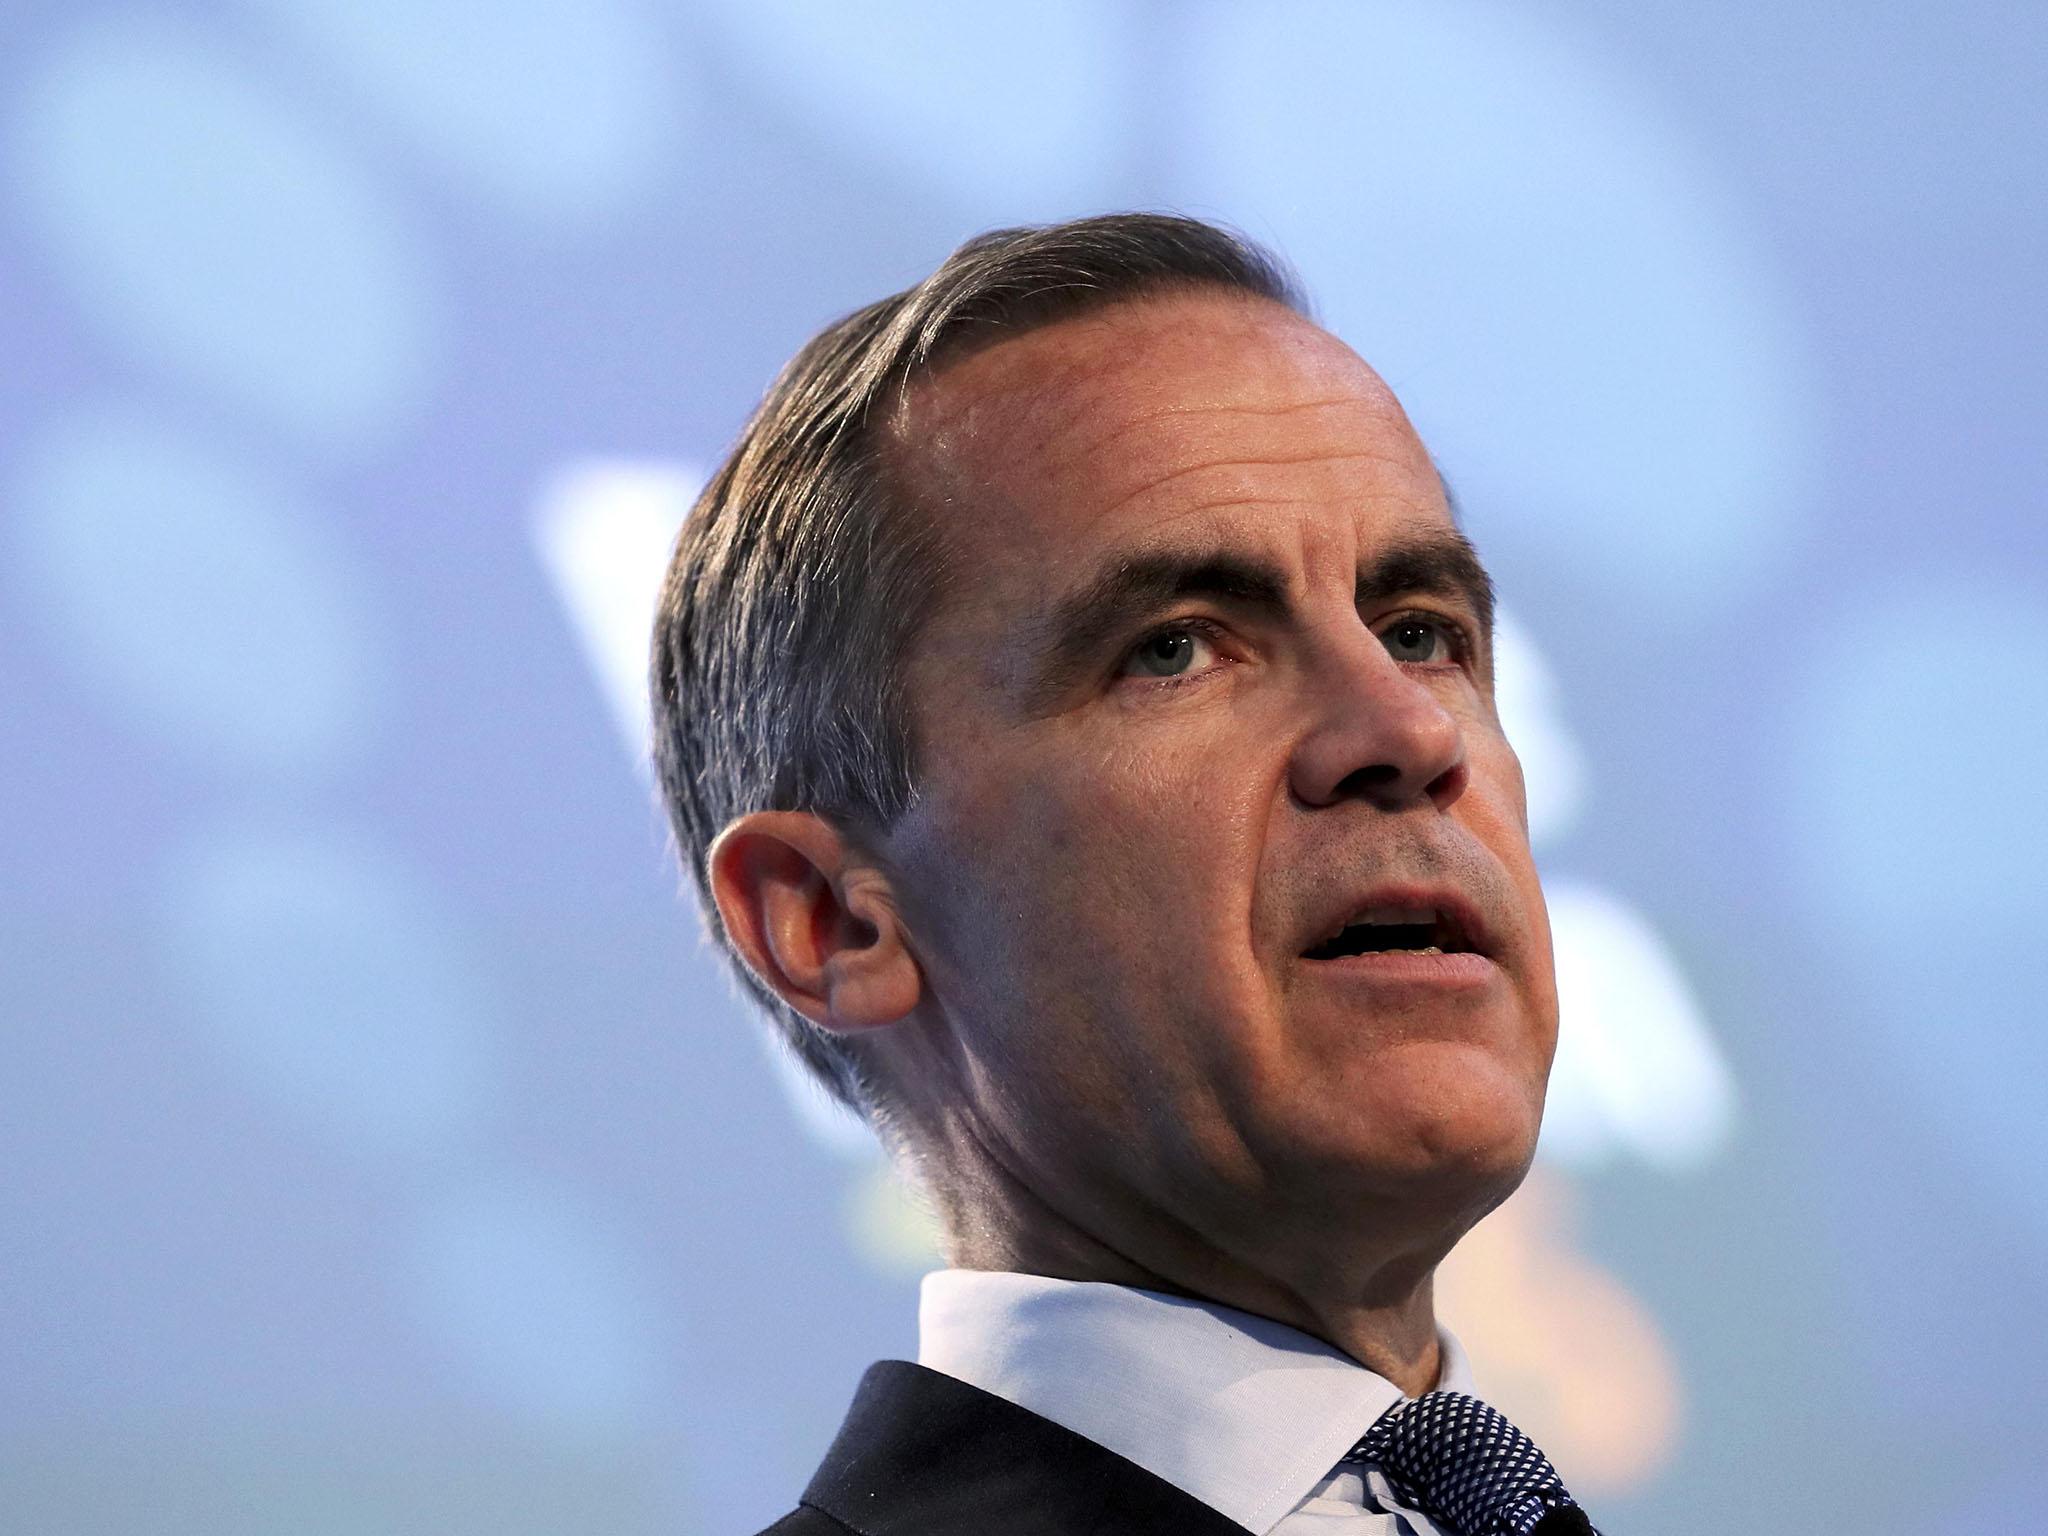 Mr Carney said this extra 12 months in office should cover the period over which Britain leaves the European Union